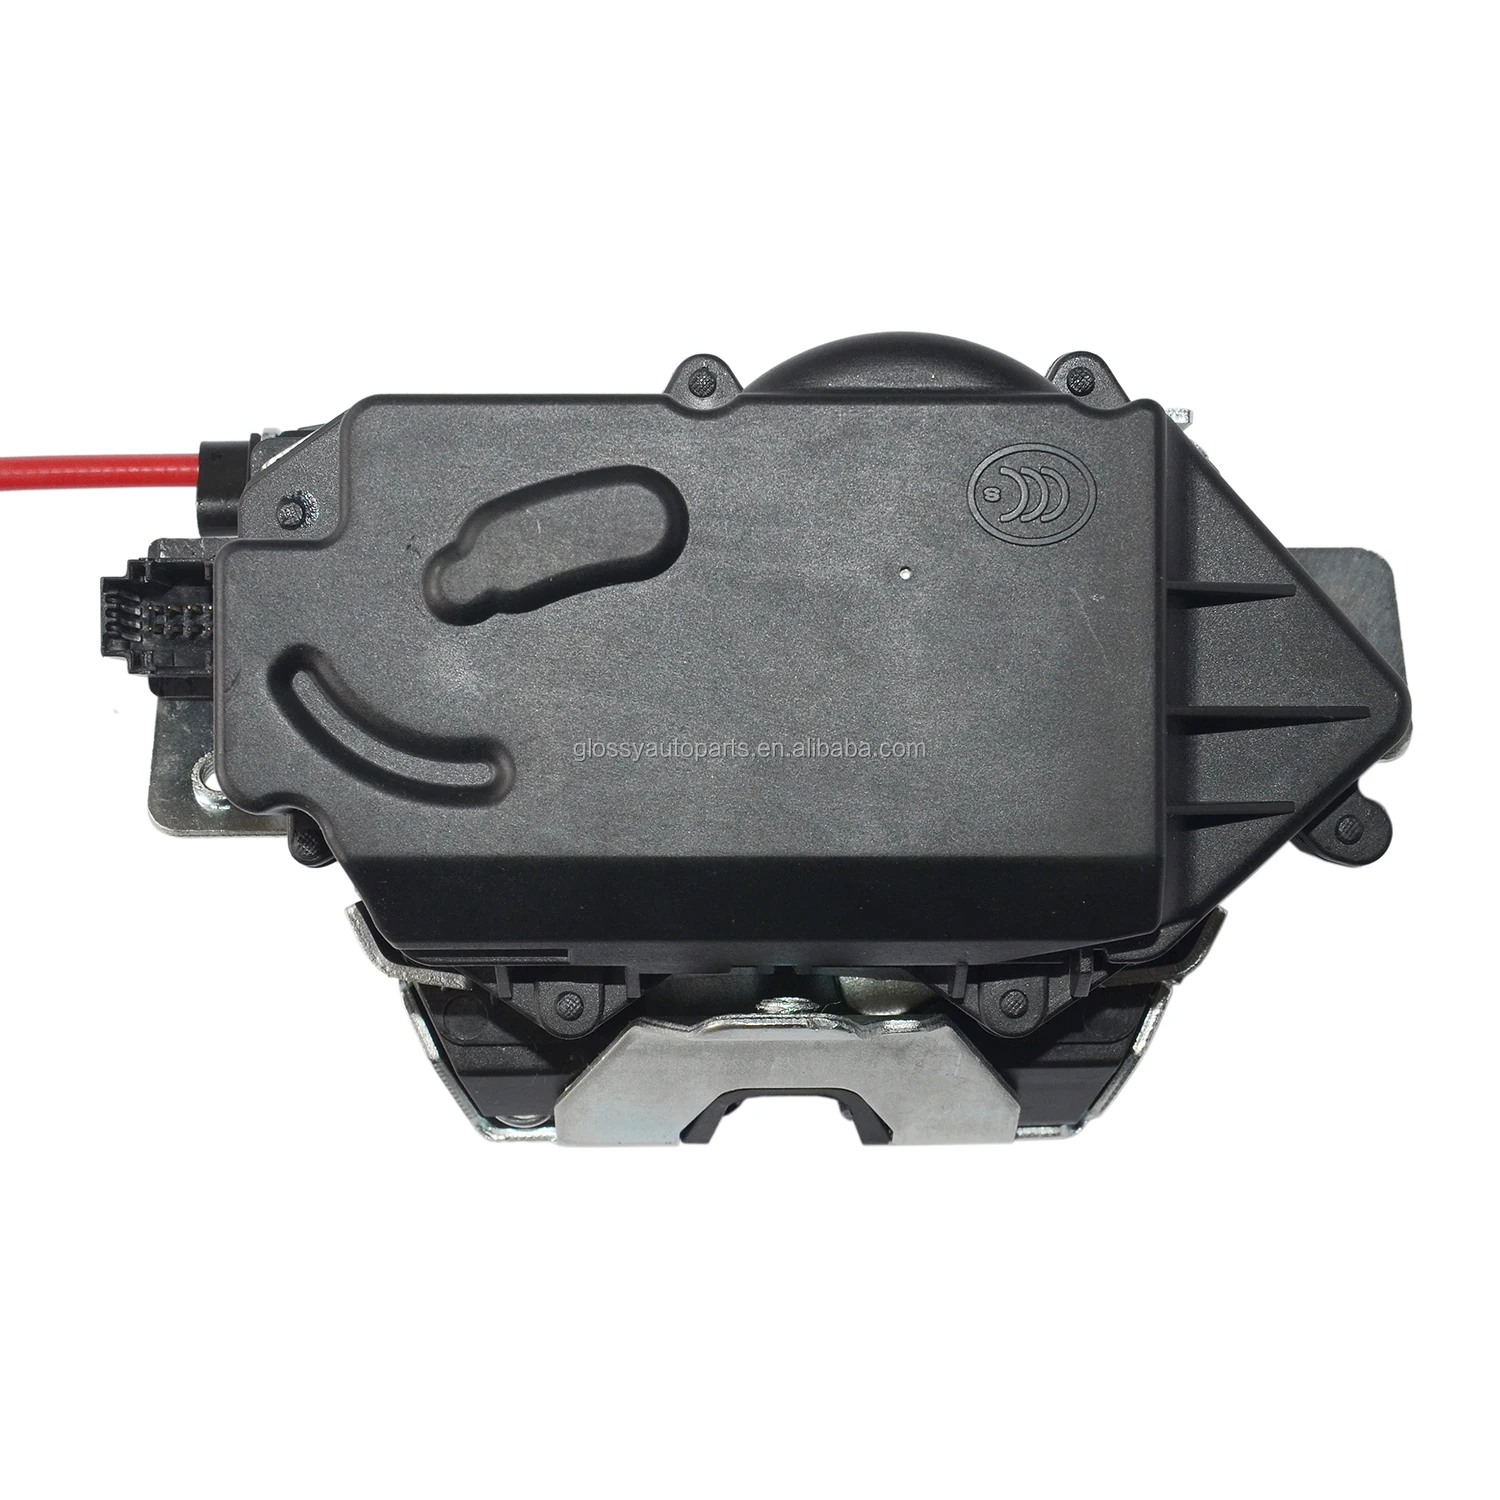 Hatch Lock Assembly For Mercedes-benz Ml63 Amg 2008-2011 164-740-06-35 164-740-06-35 1647400635（1） 